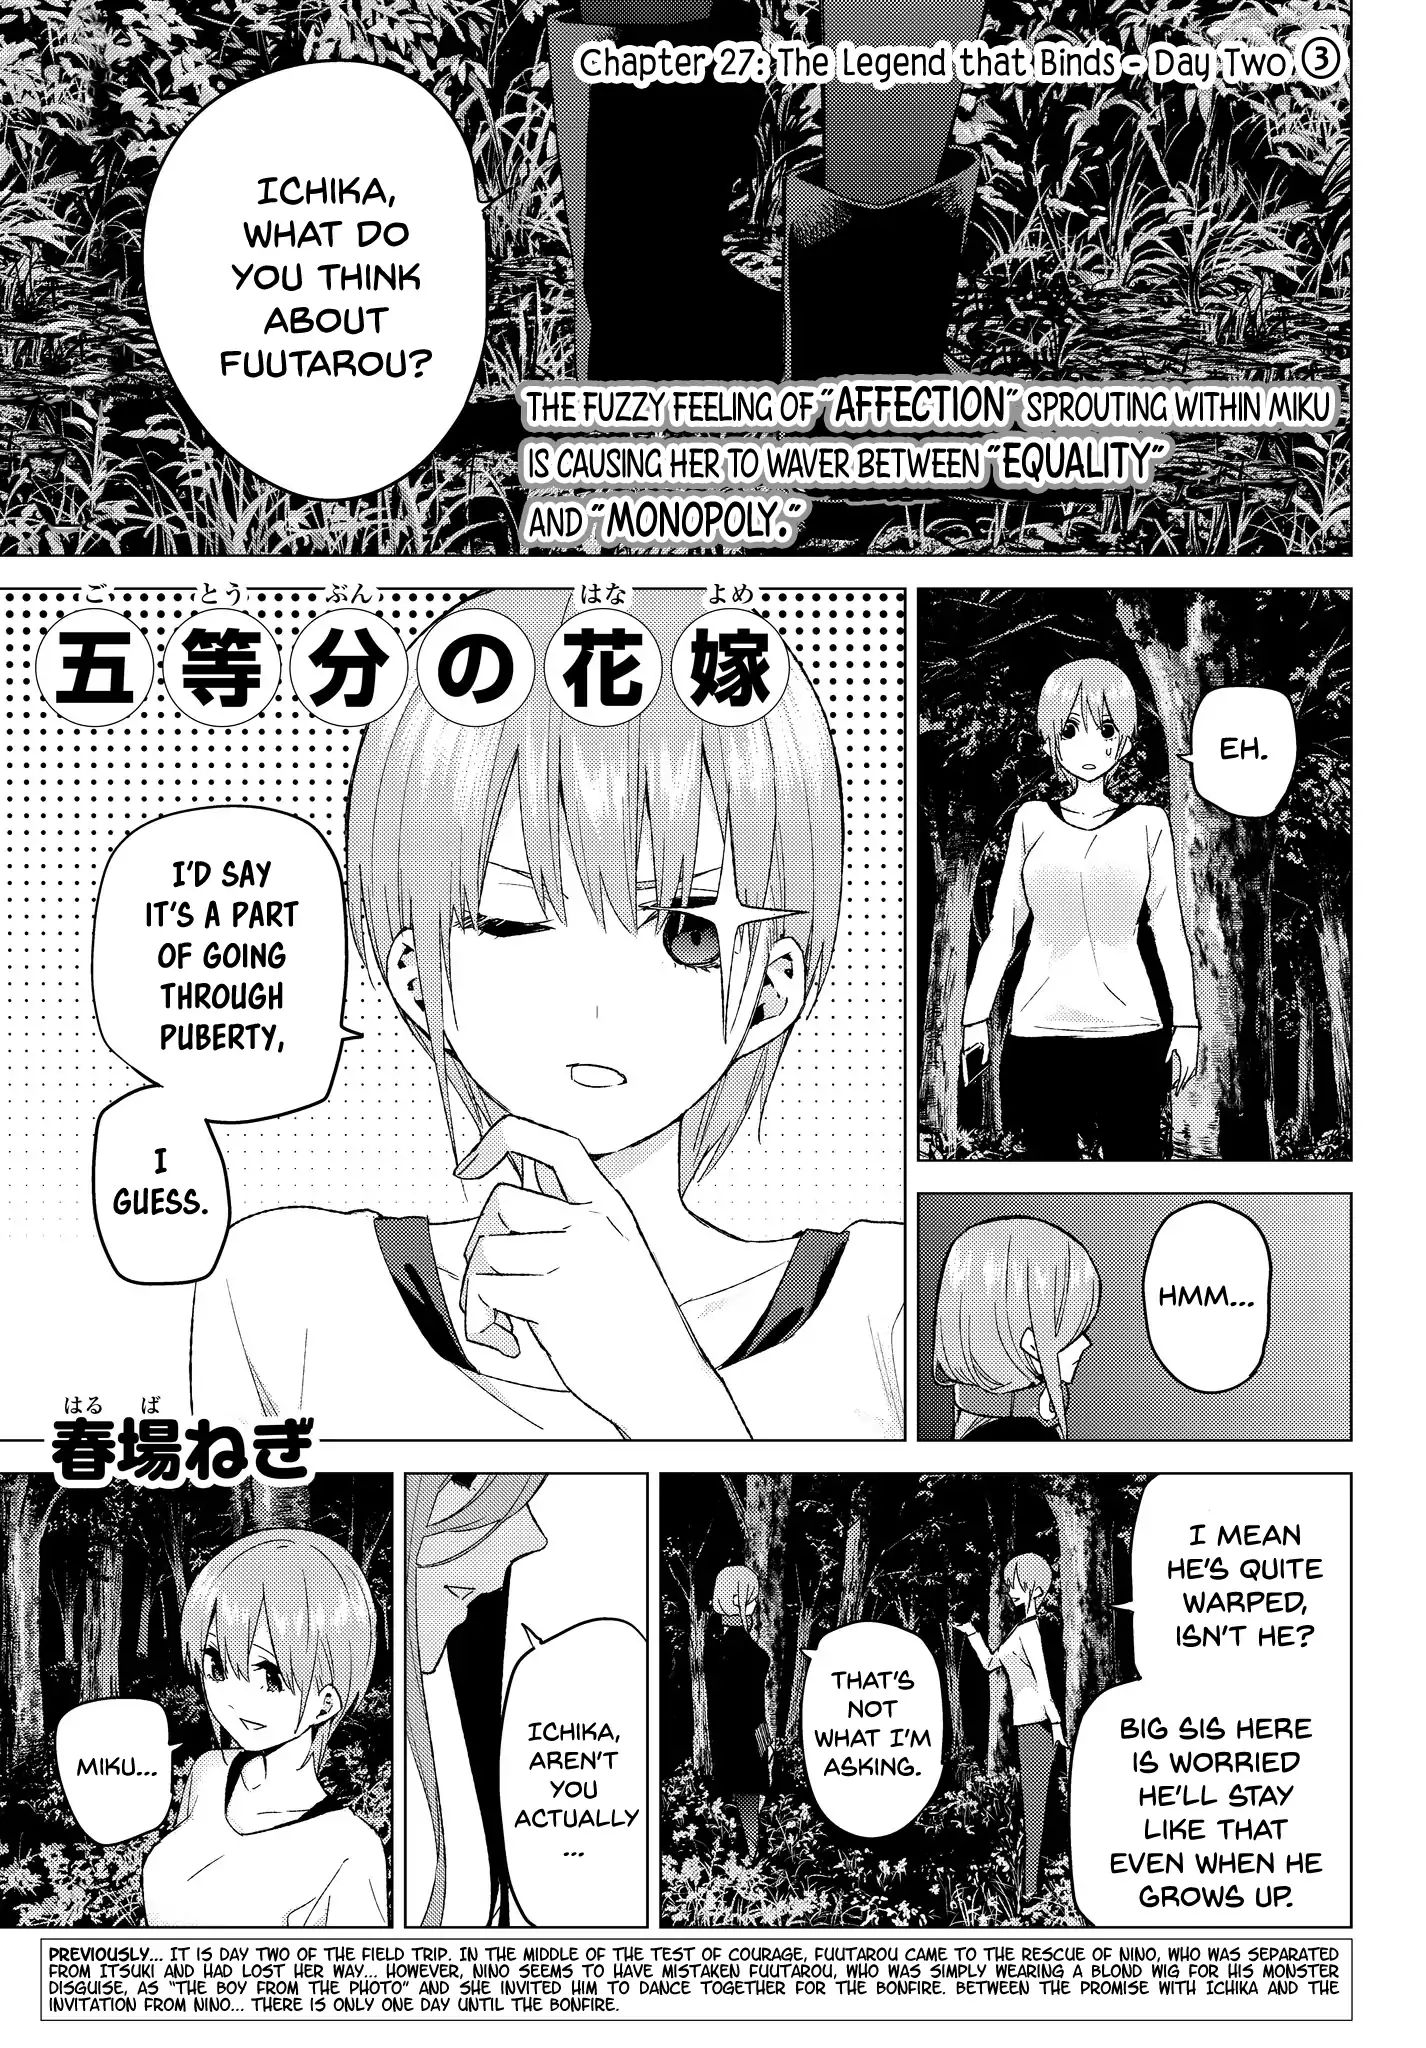 Go-Toubun No Hanayome Vol.4 Chapter 27: The Legend That Binds - Day Two (3) - Picture 1